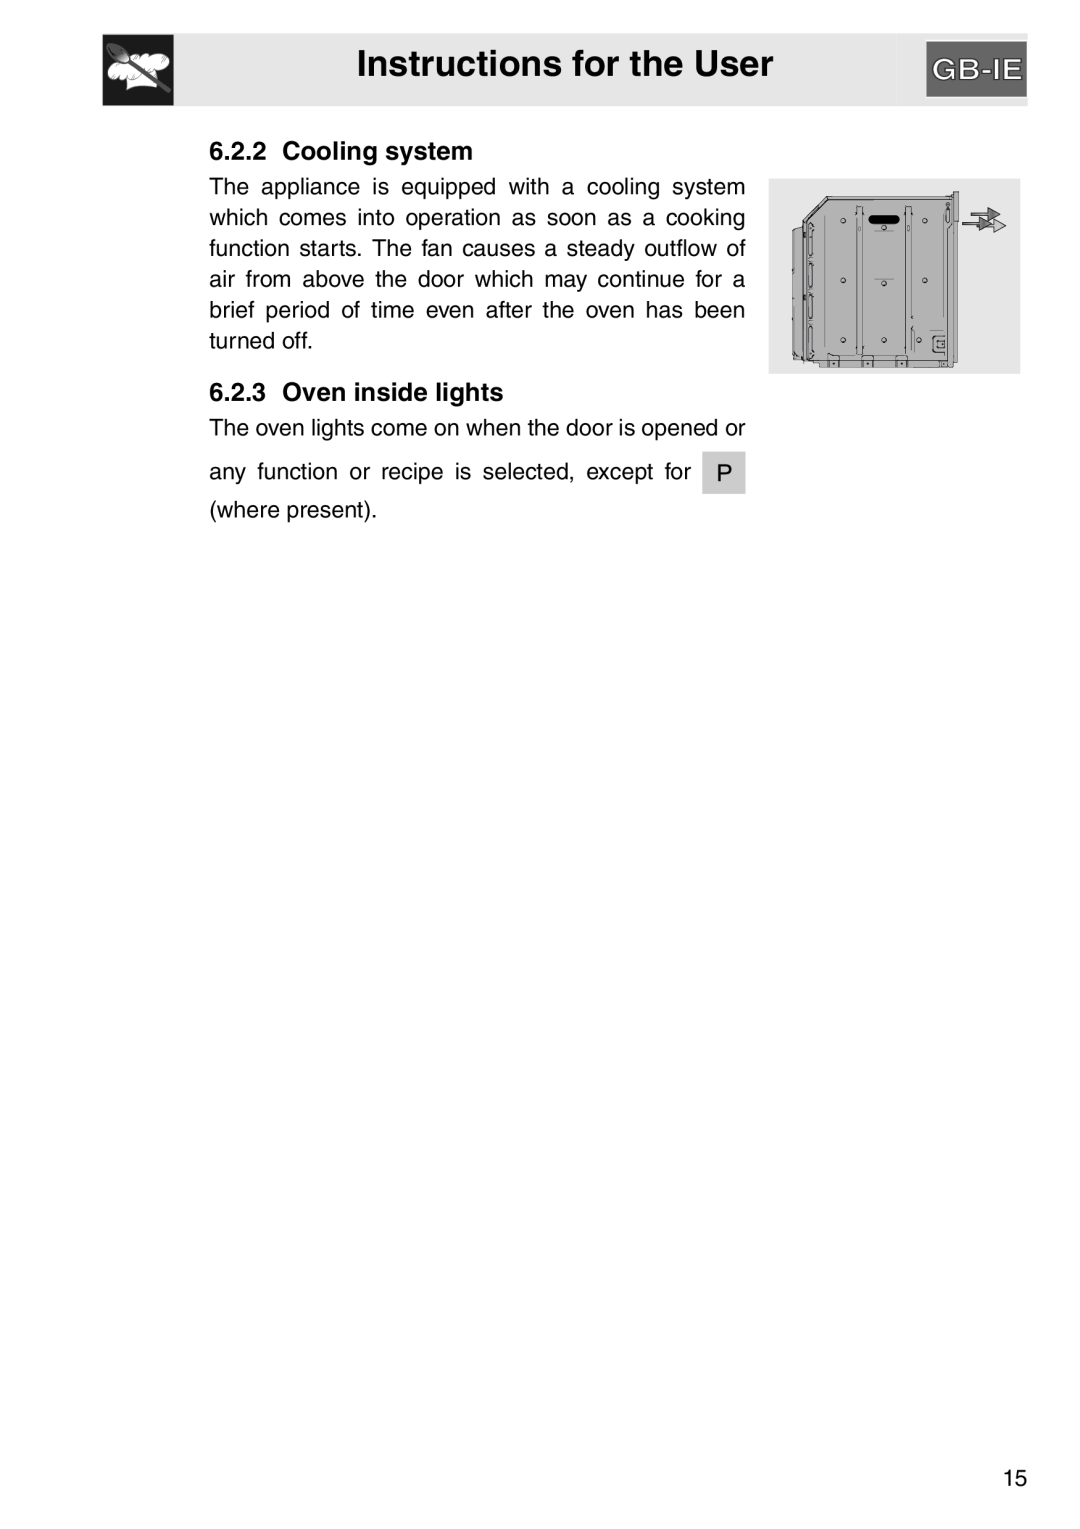 Smeg SA561X-9 installation instructions Cooling system, Oven inside lights, Instructions for the User 